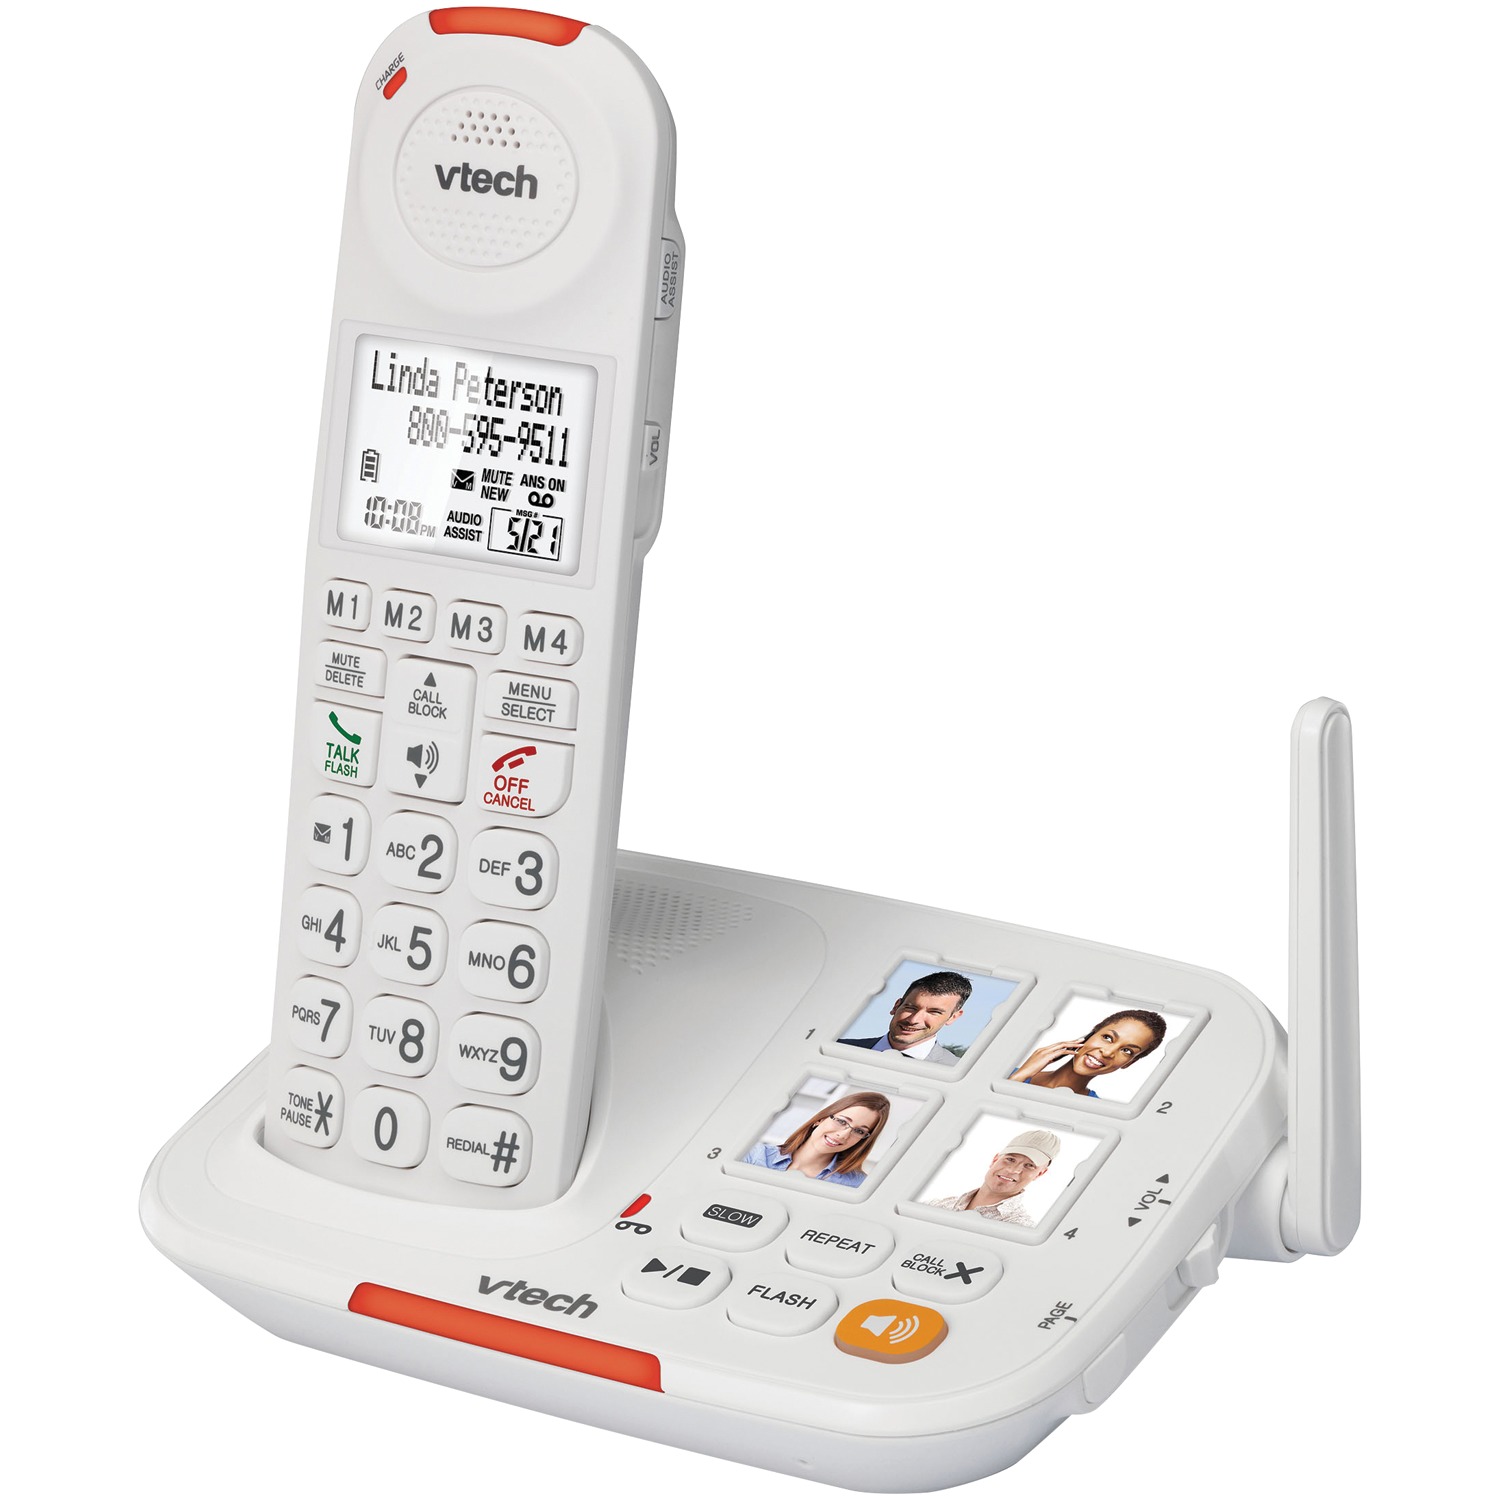 VTech VTSN5127 Amplified Cordless Answering System with Big Buttons & Display - image 2 of 3